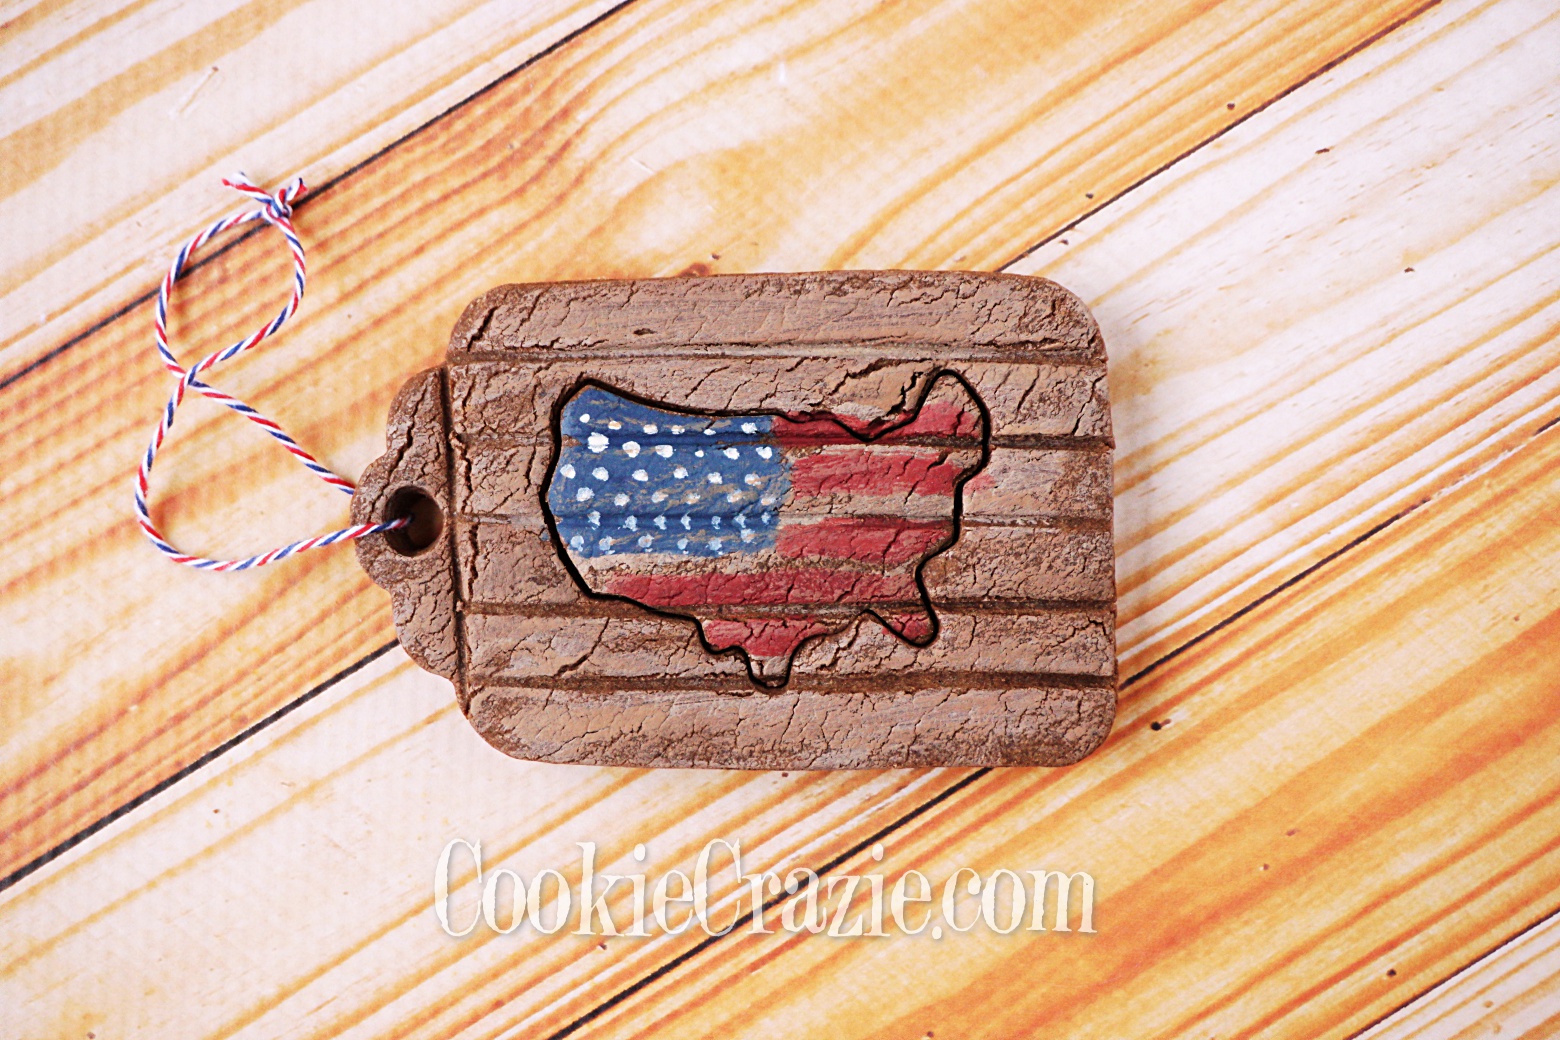  USA Map Gift Tag Decorated Sugar Cookie YouTube video  HERE  